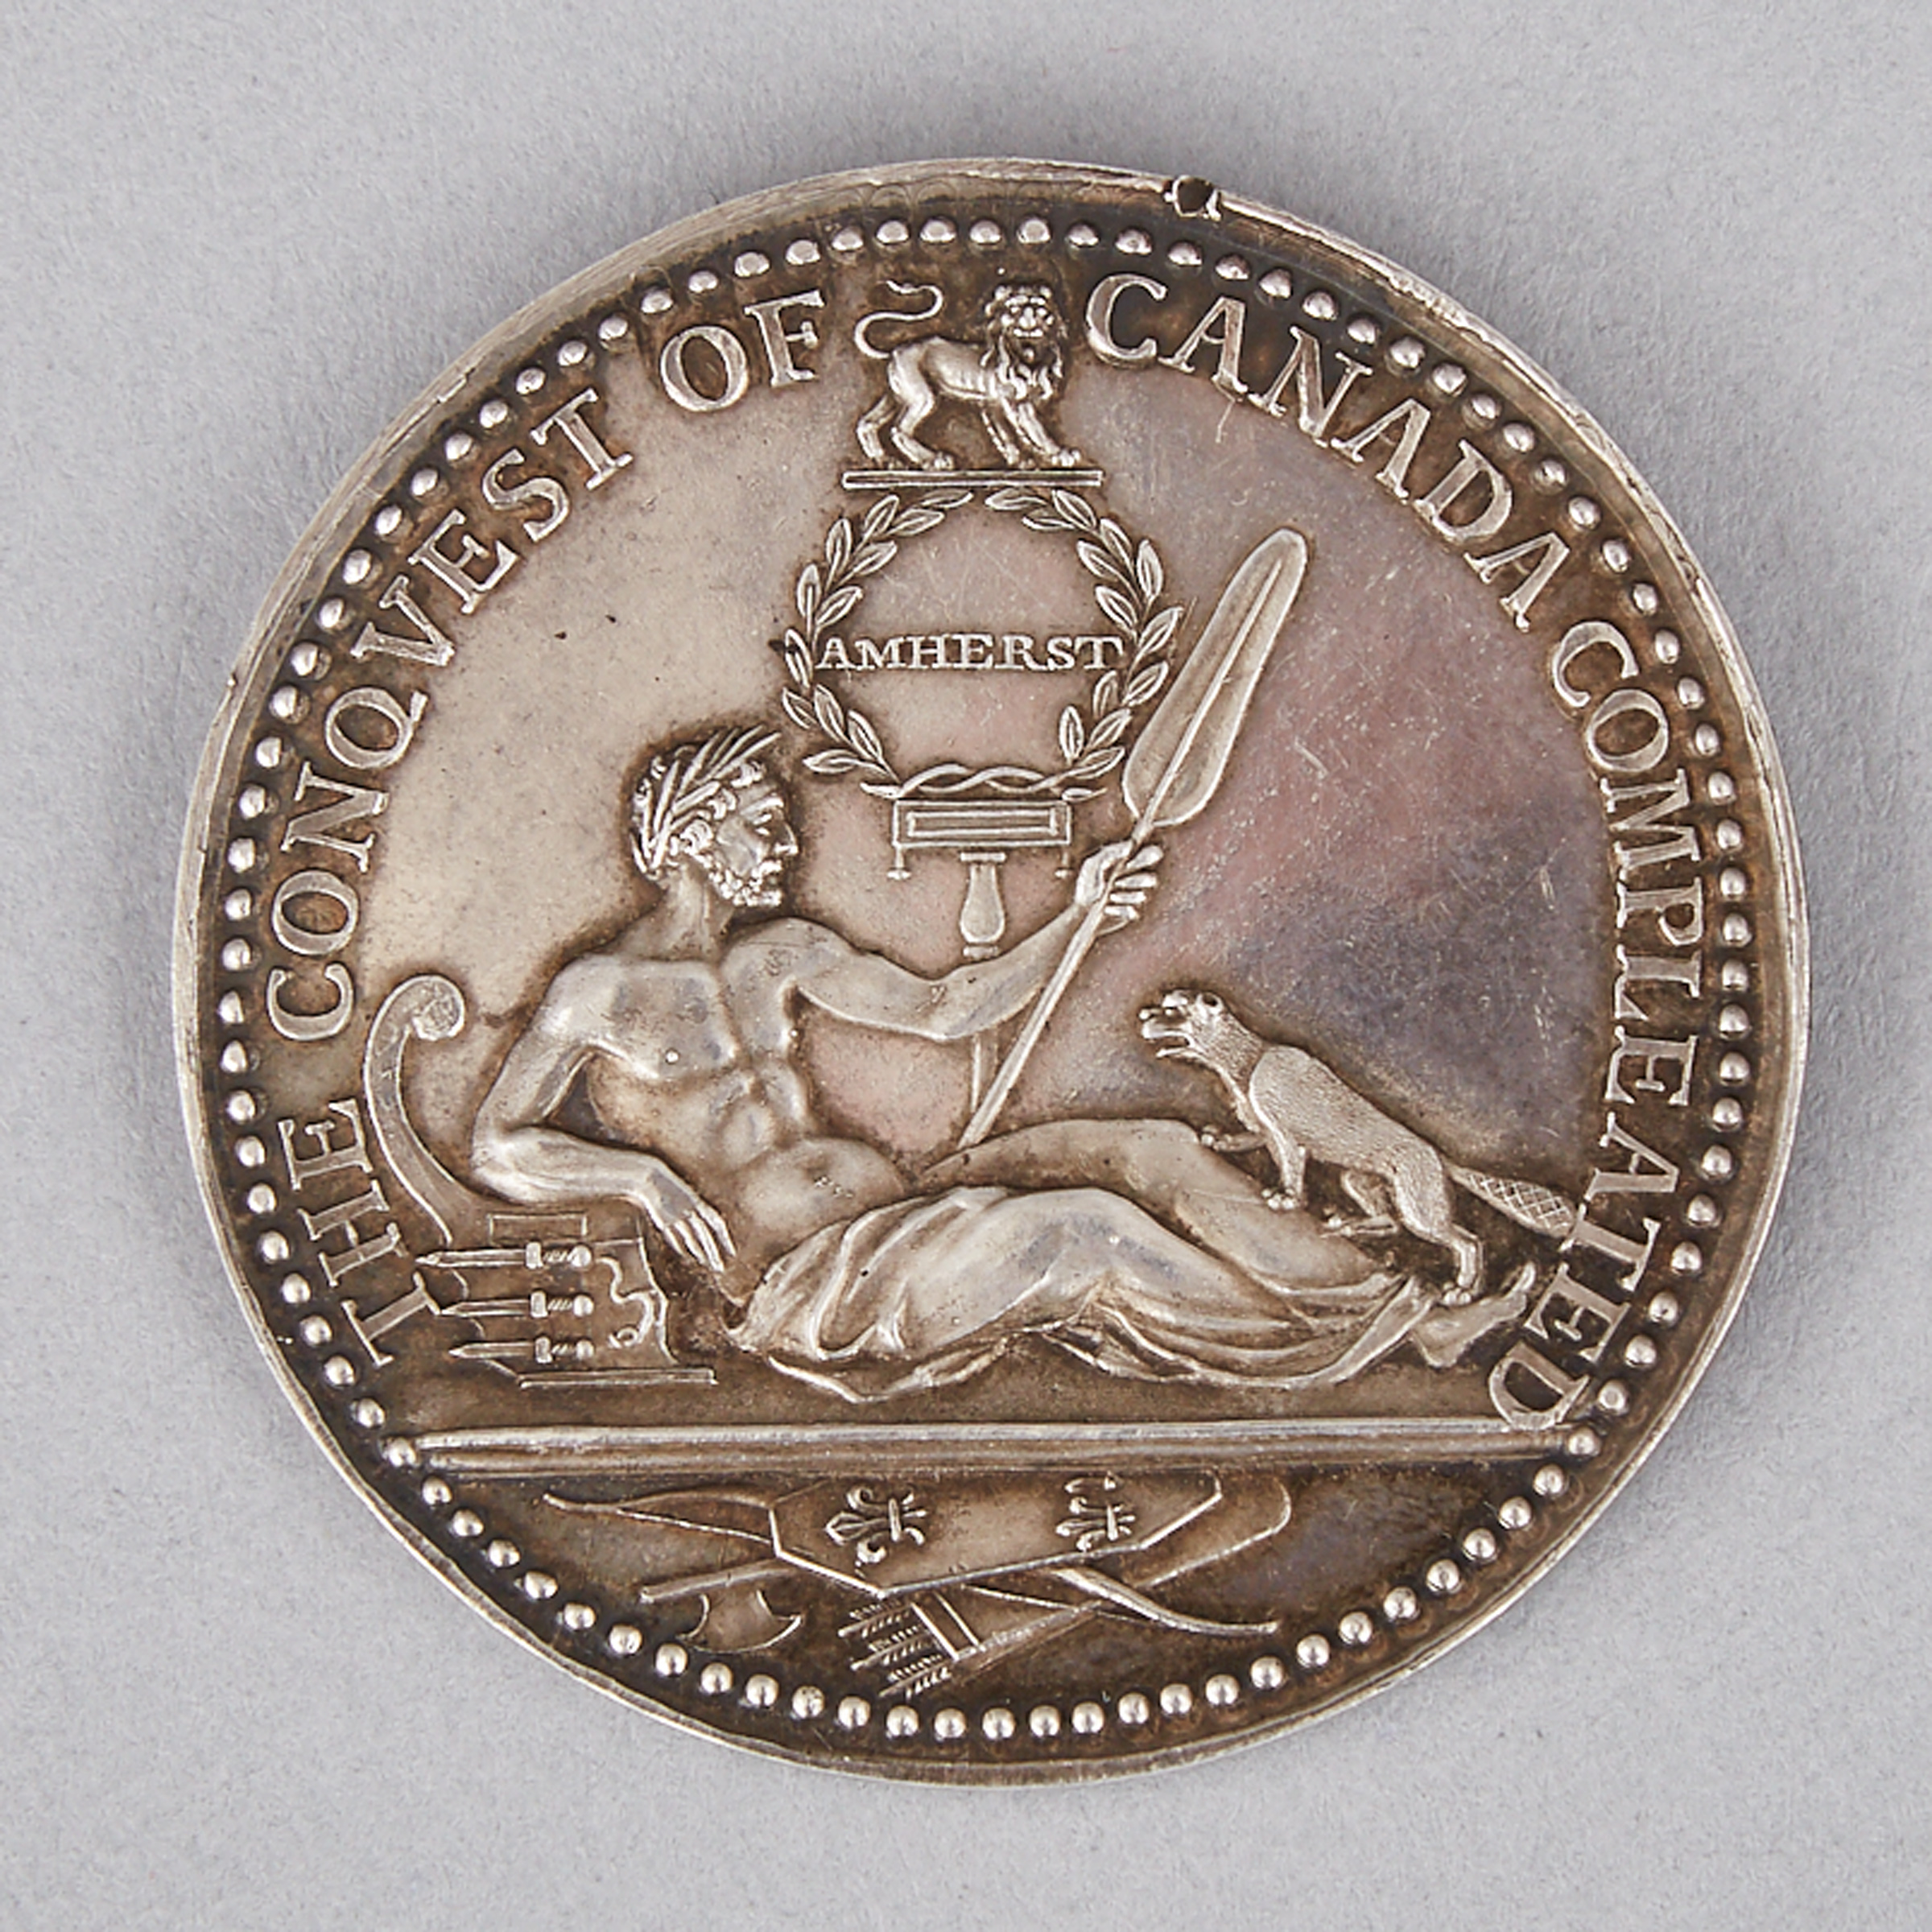 William Pitt, French and Indian War, Montreal Taken, Conquest of Canada Complete, Silver Medal, 1760